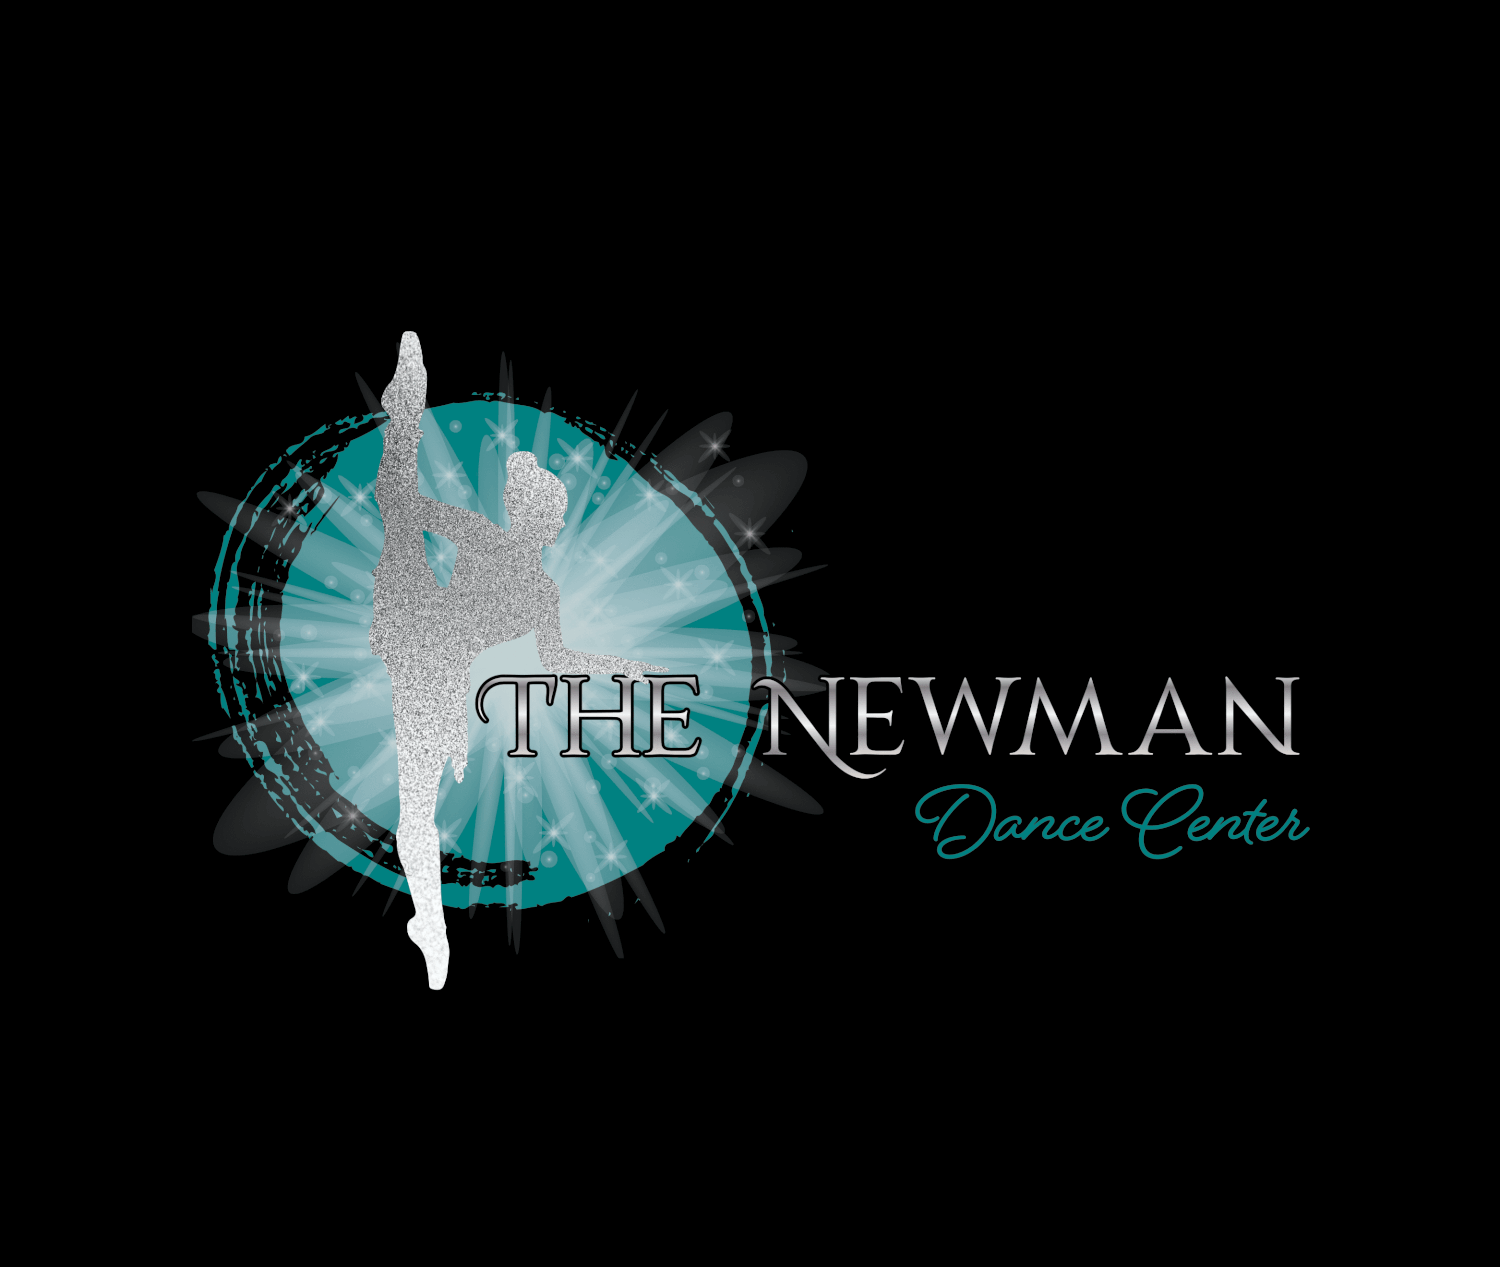 THE NEWMAN